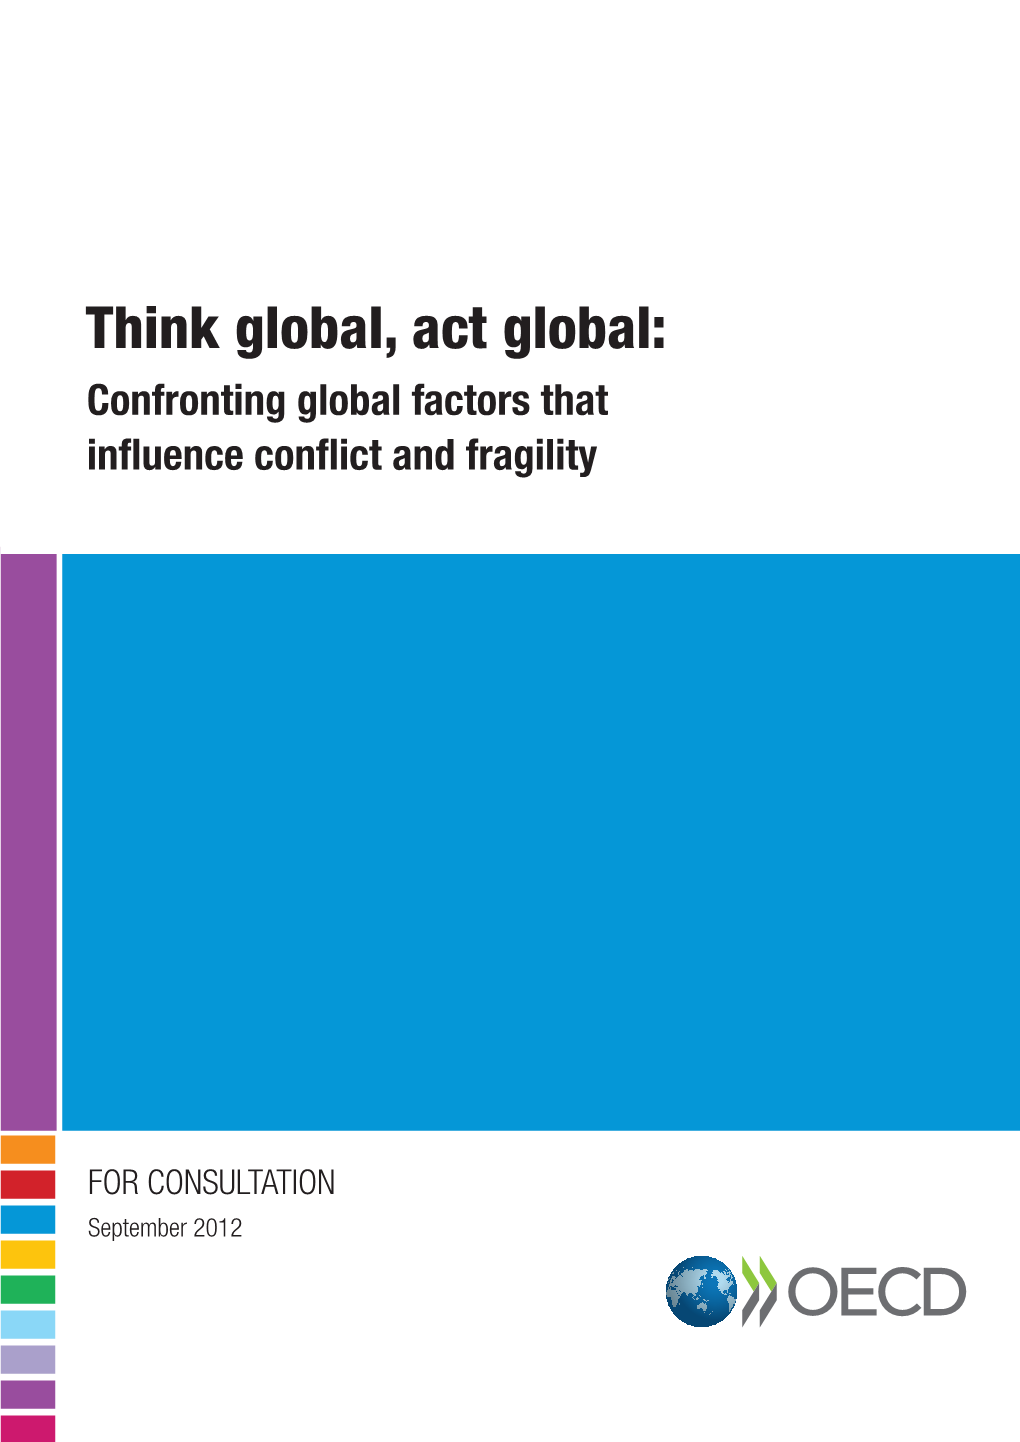 Think Global, Act Global: Confronting Global Factors That Influence Conflict and Fragility